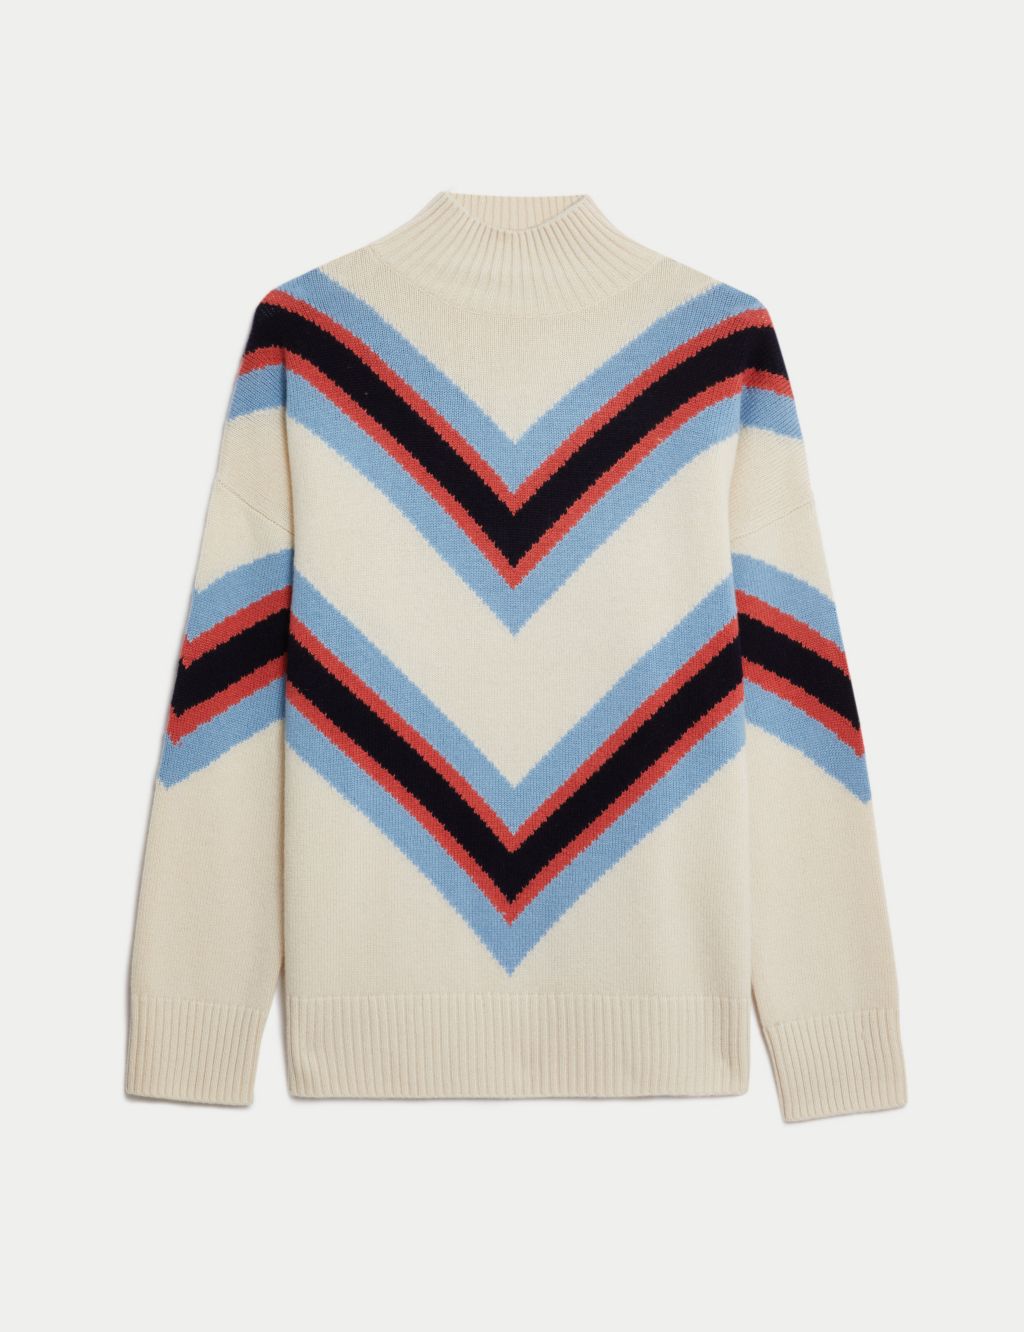 Wool Rich Striped Jumper with Cashmere image 2